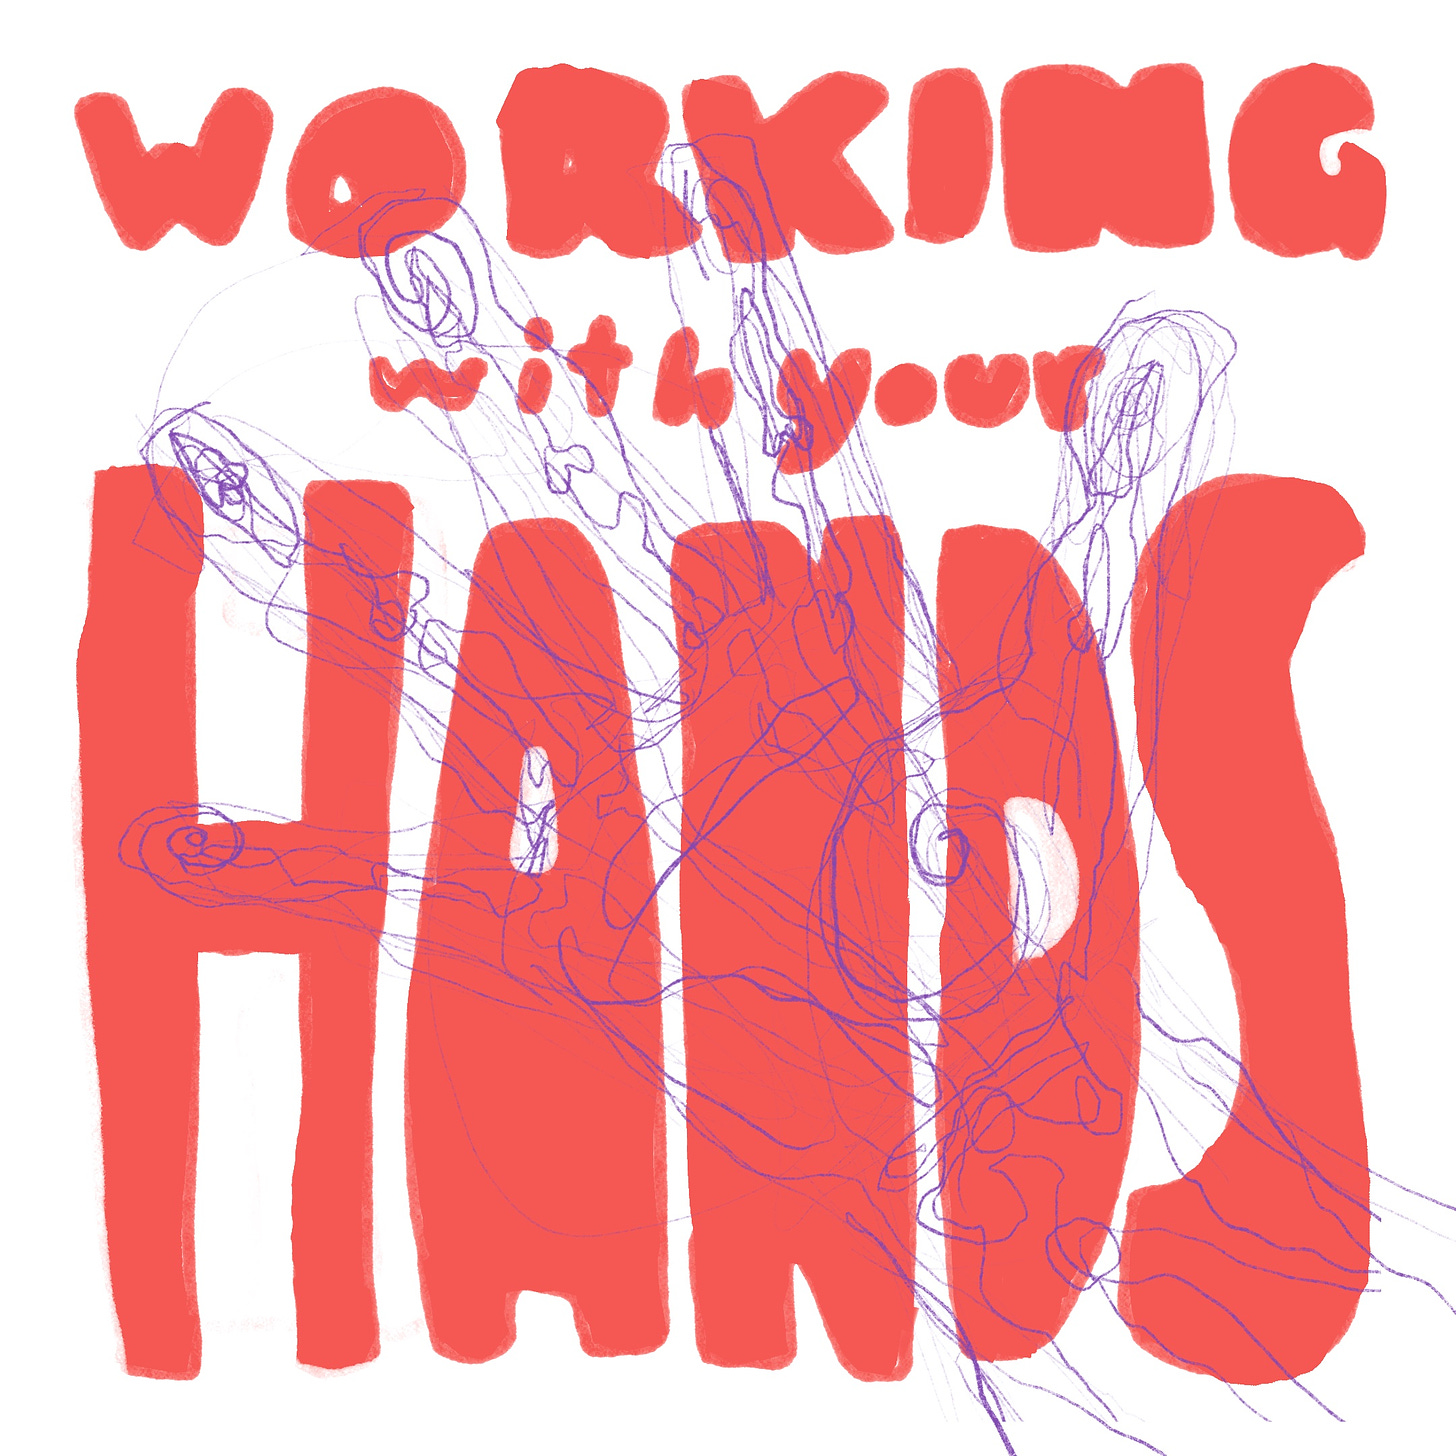 Working with your hands